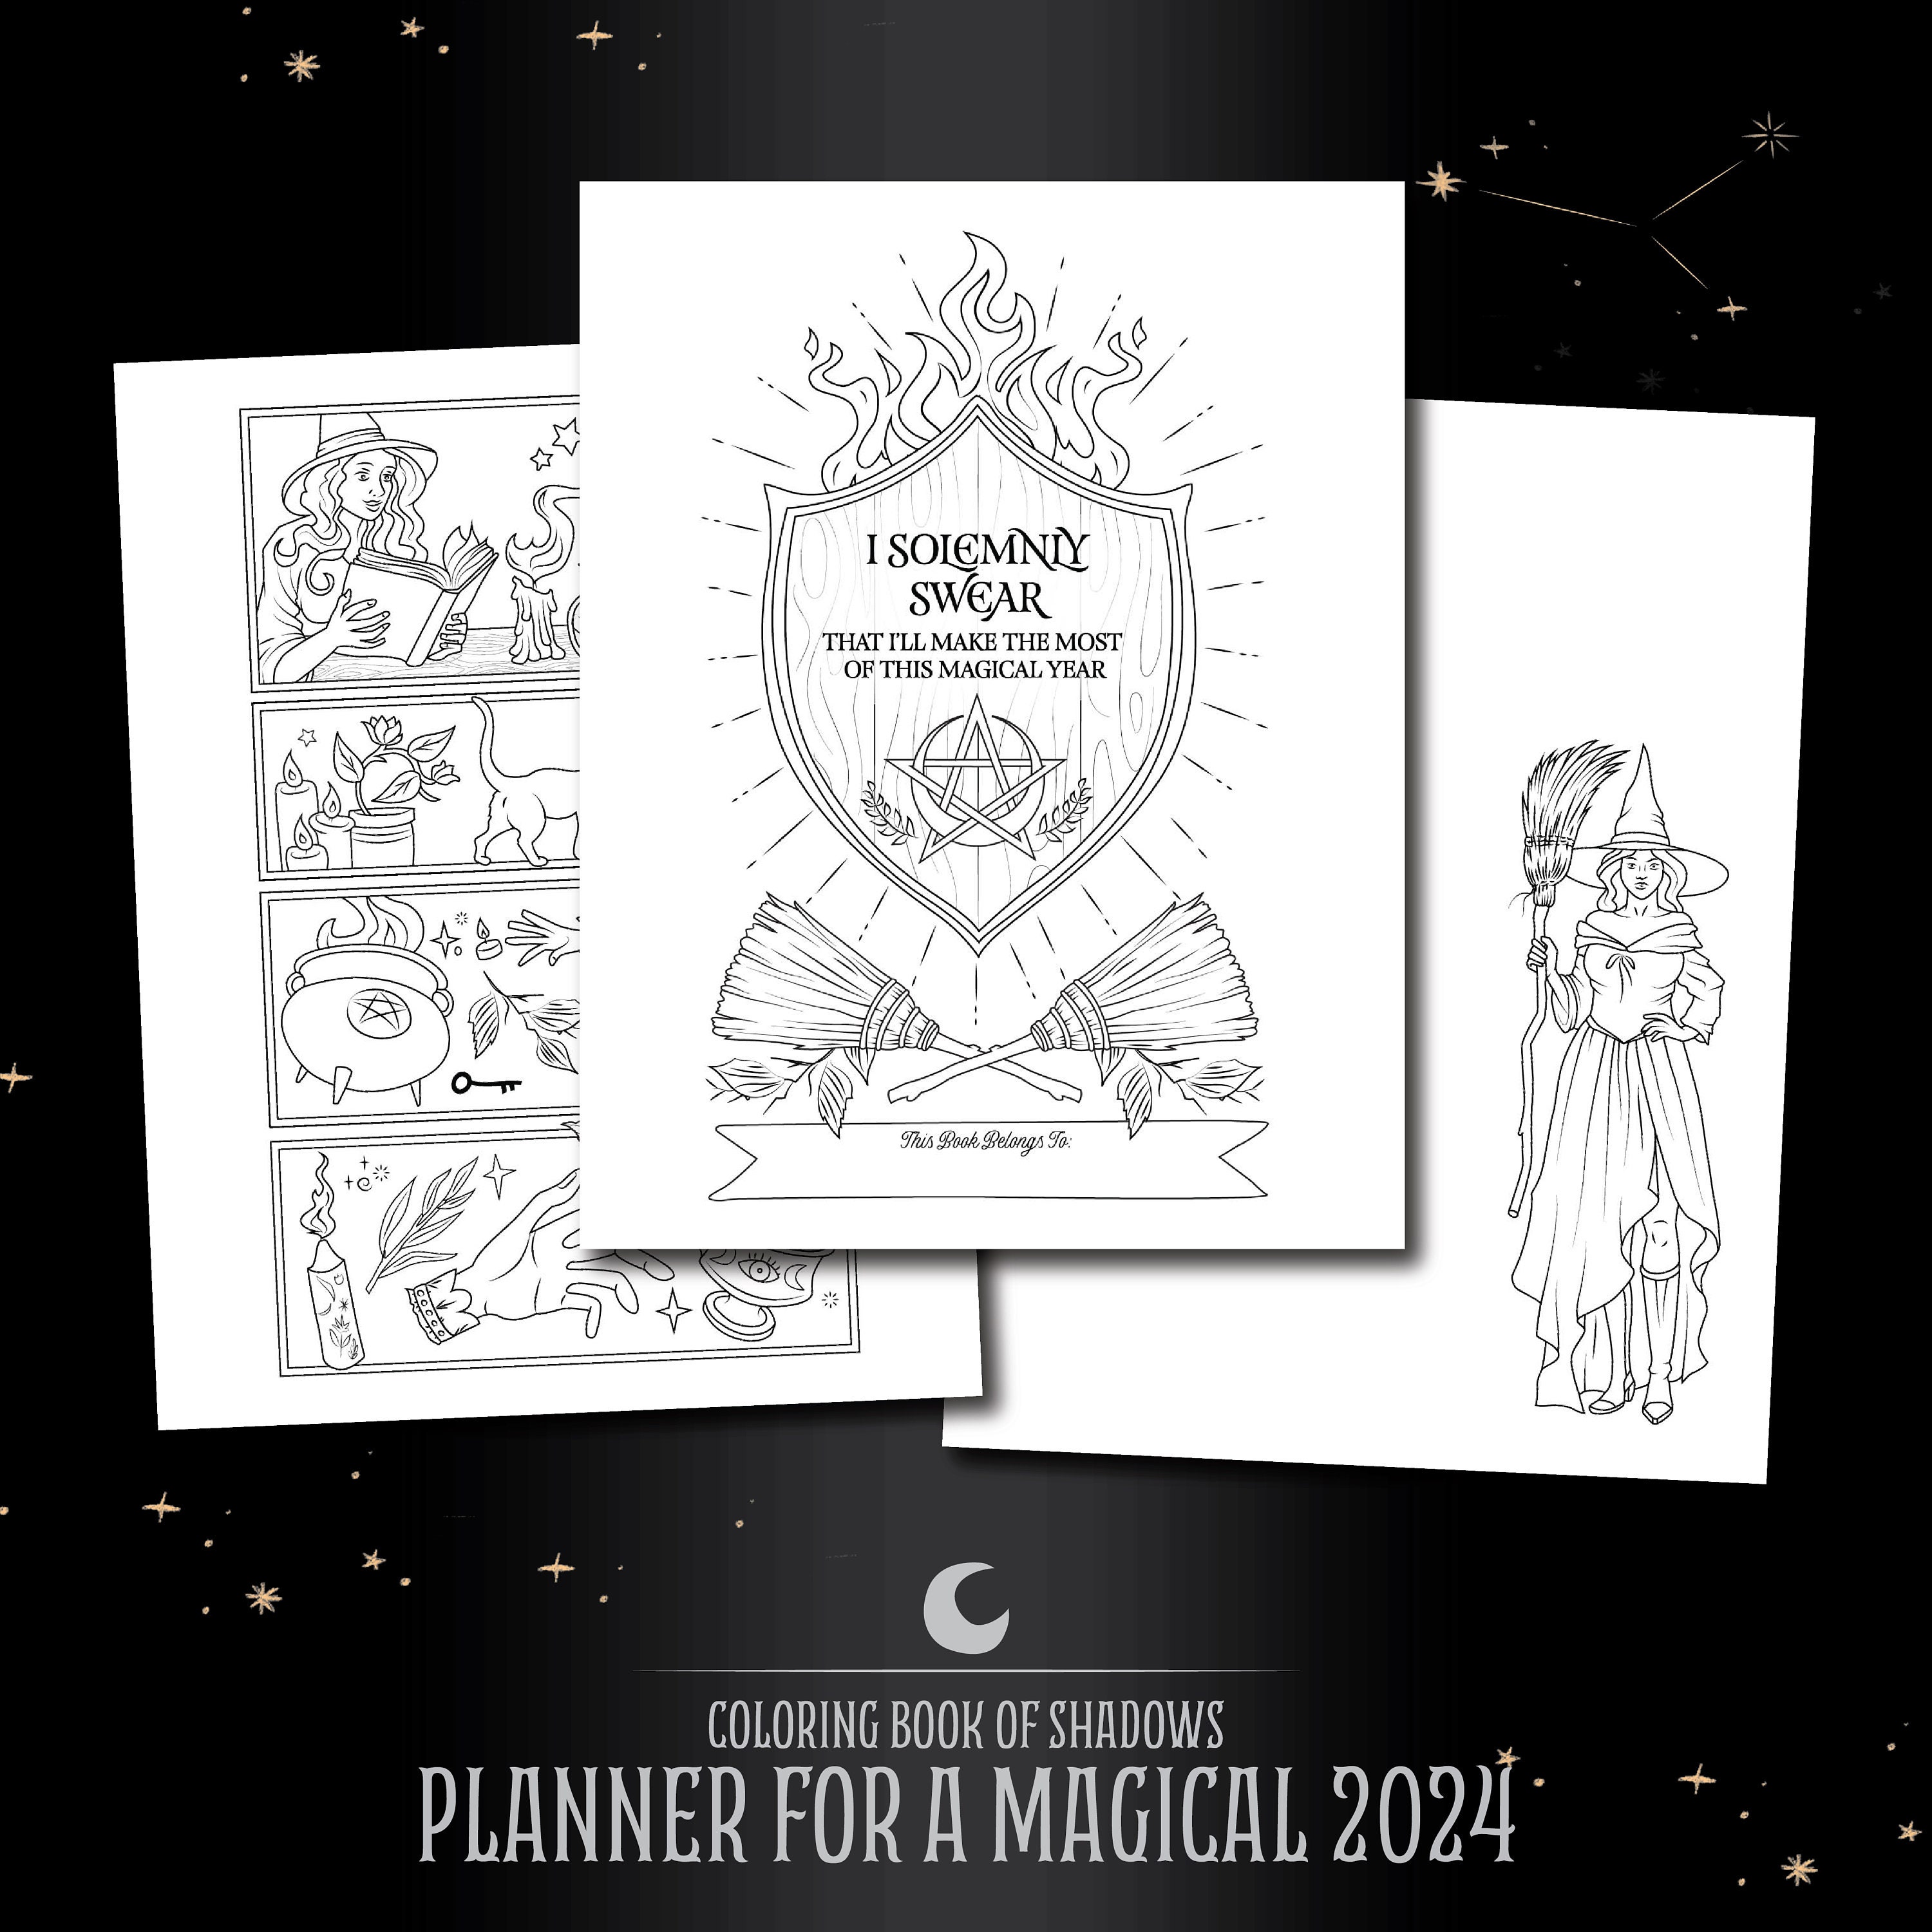 Planner for a Magical 2024: Full Color [Book]